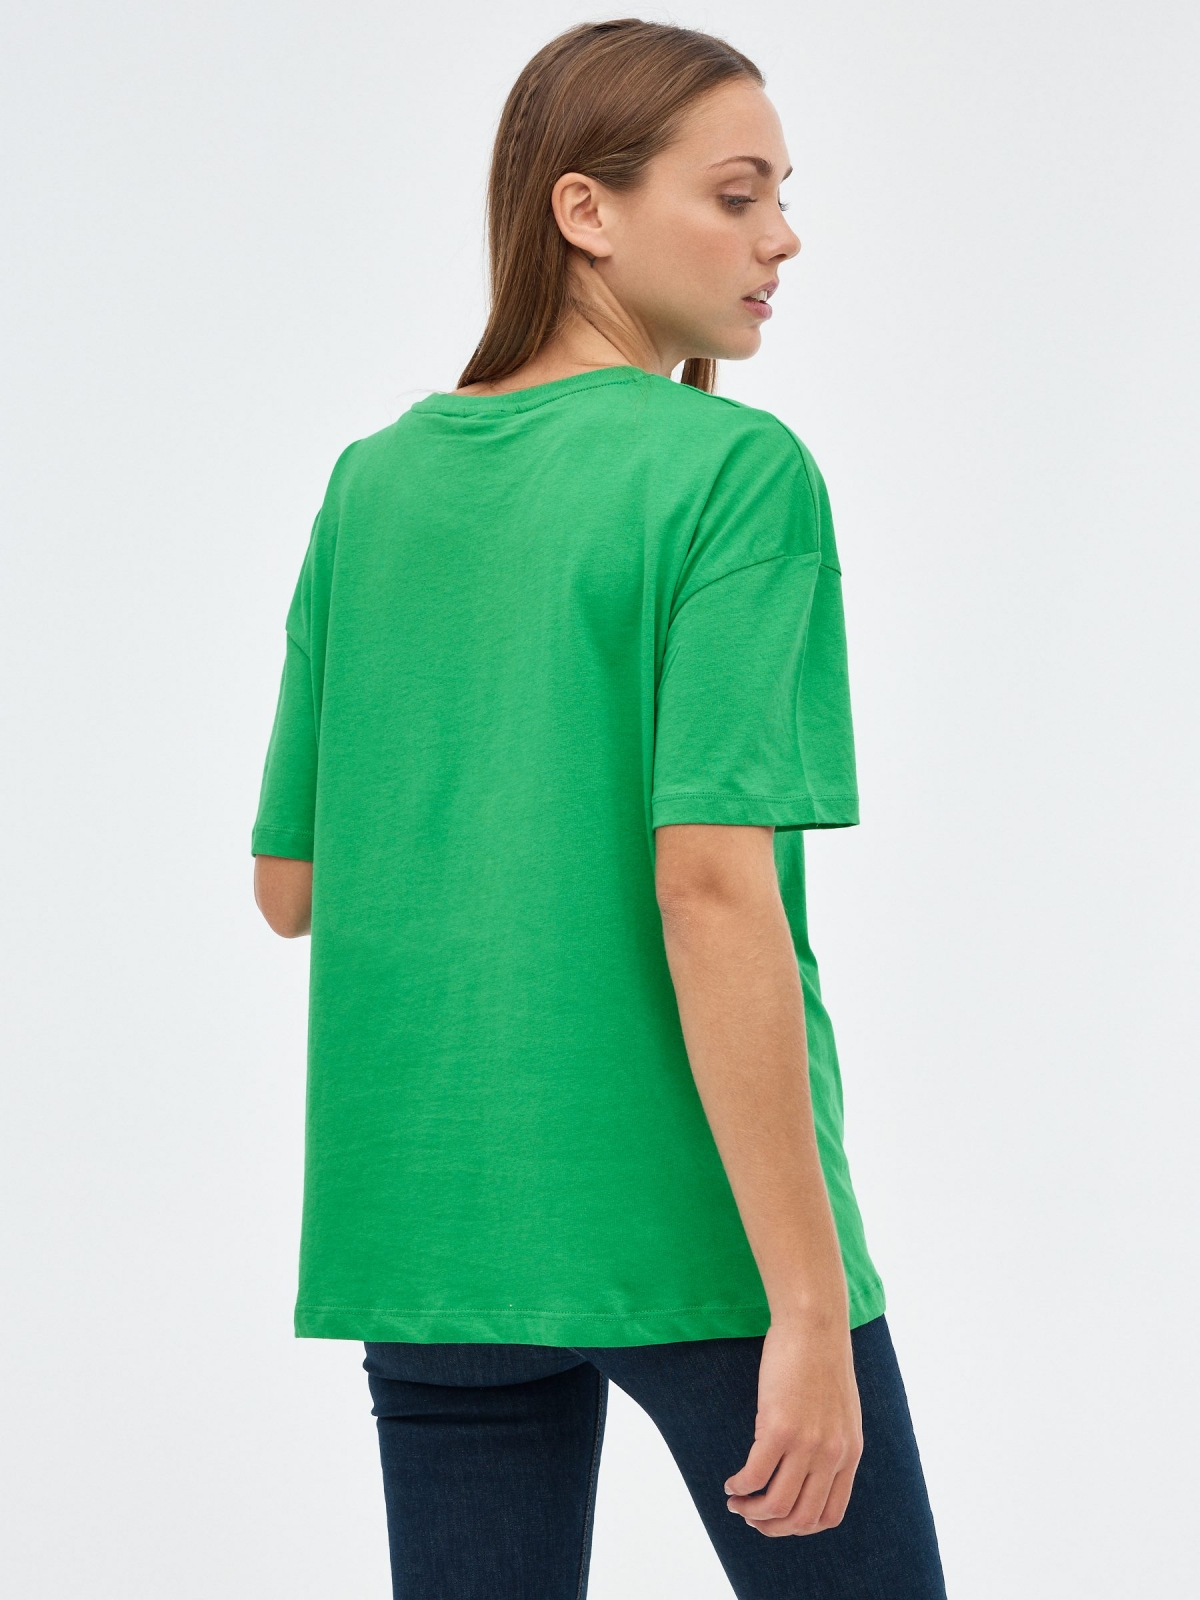 Snoopy oversize t-shirt green middle back view